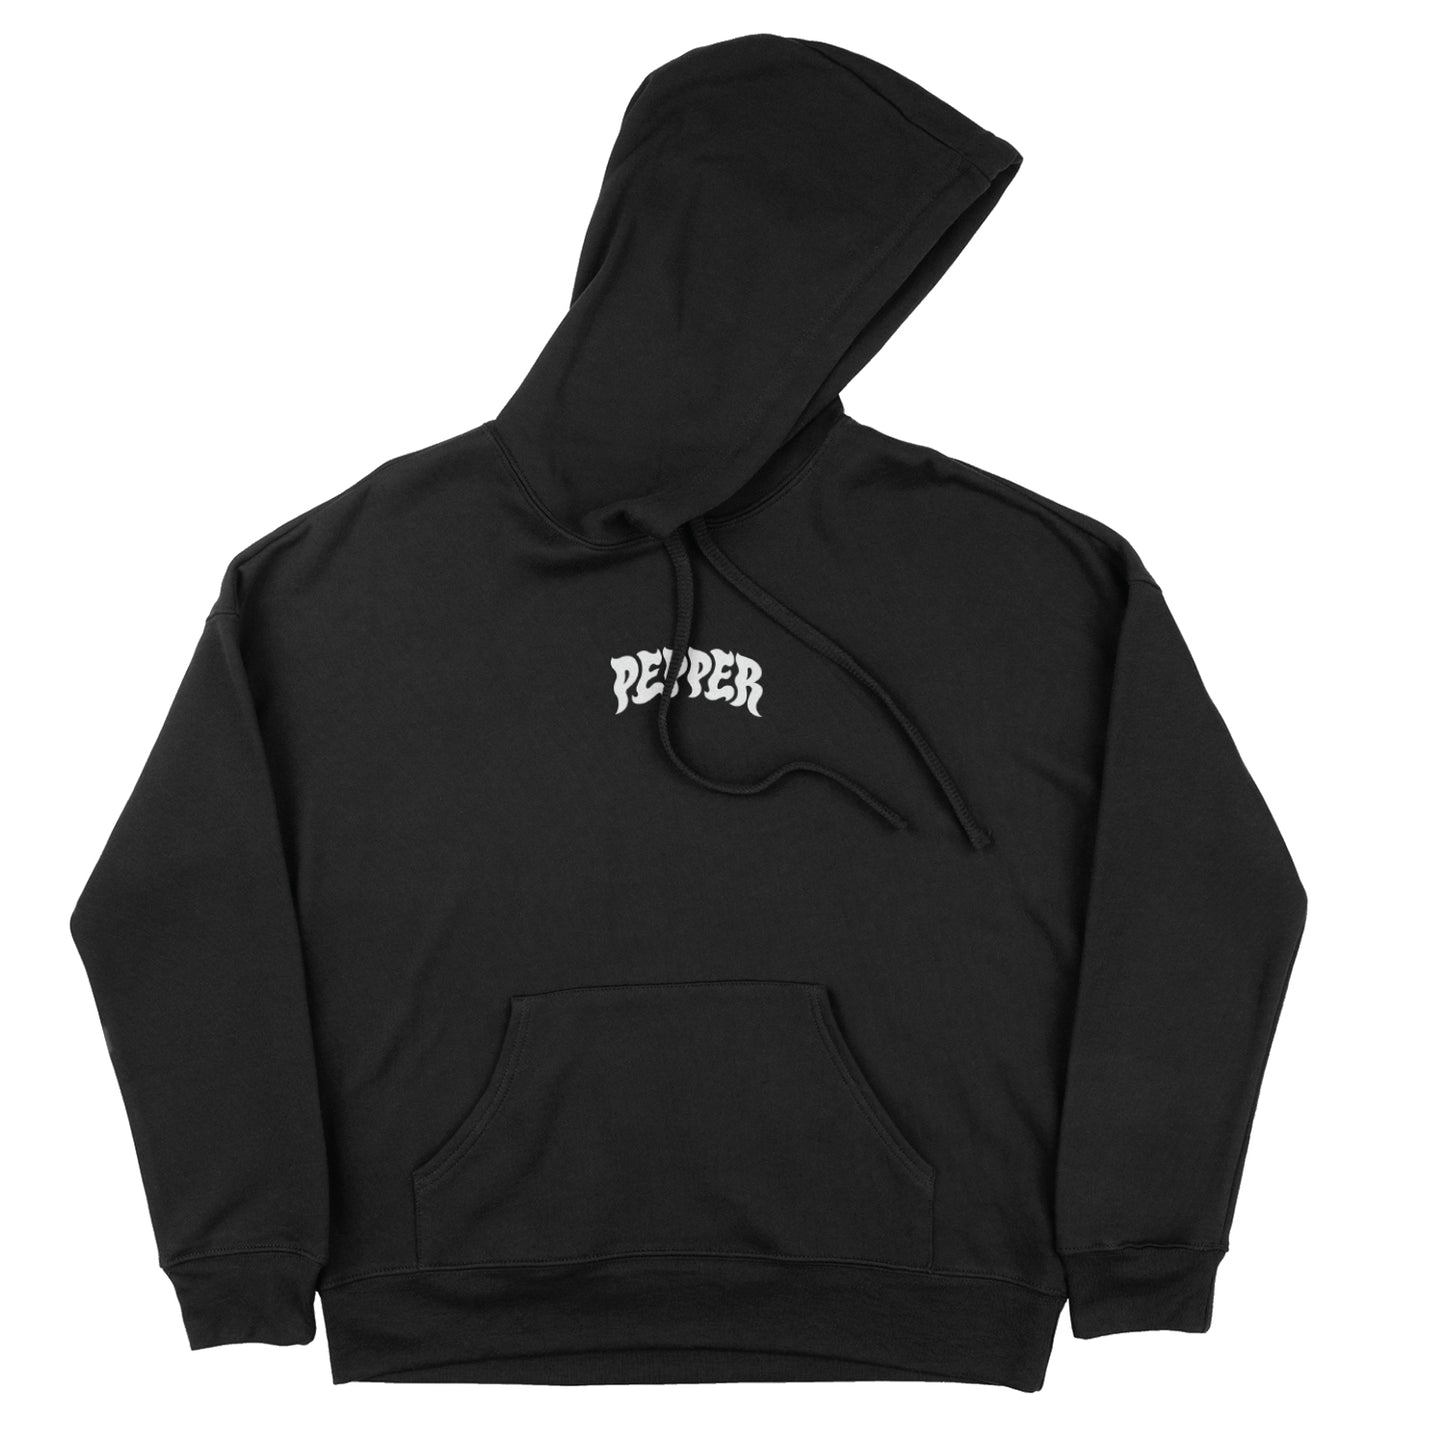 Pepper Embroidered Hoodie Black